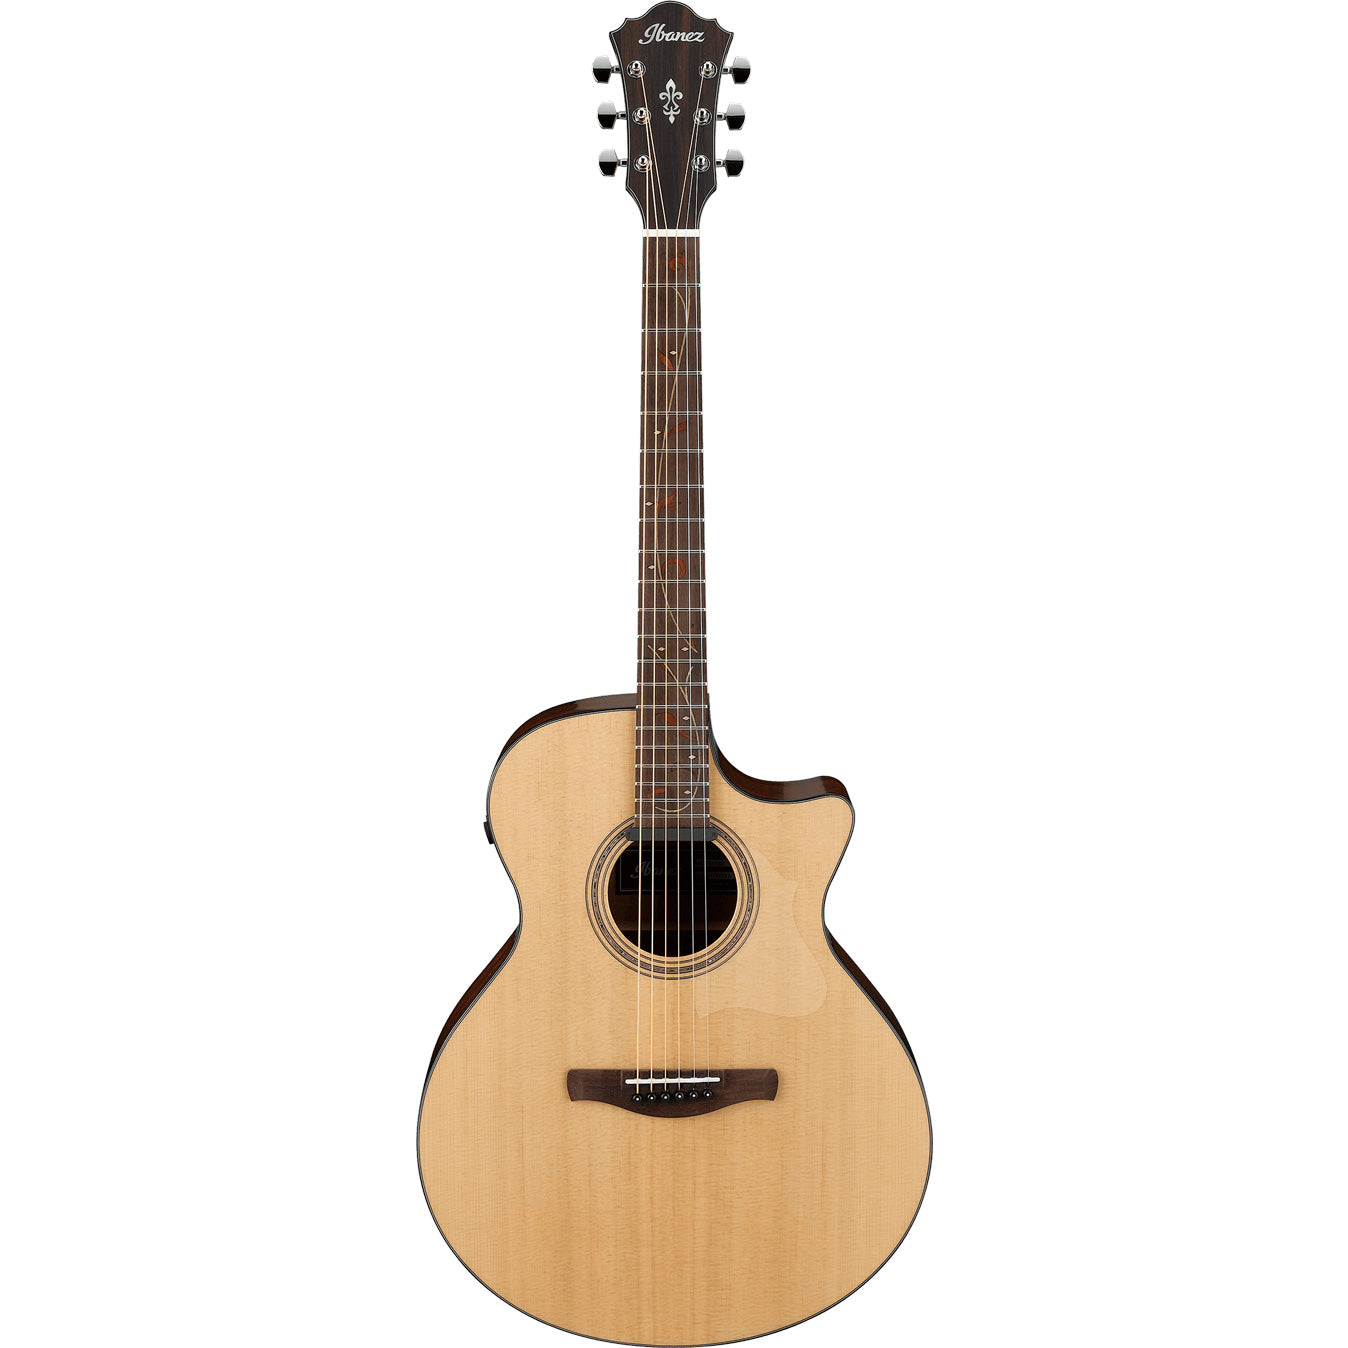 Ibanez AE275LGS Natural Low Gloss Acoustic Electric